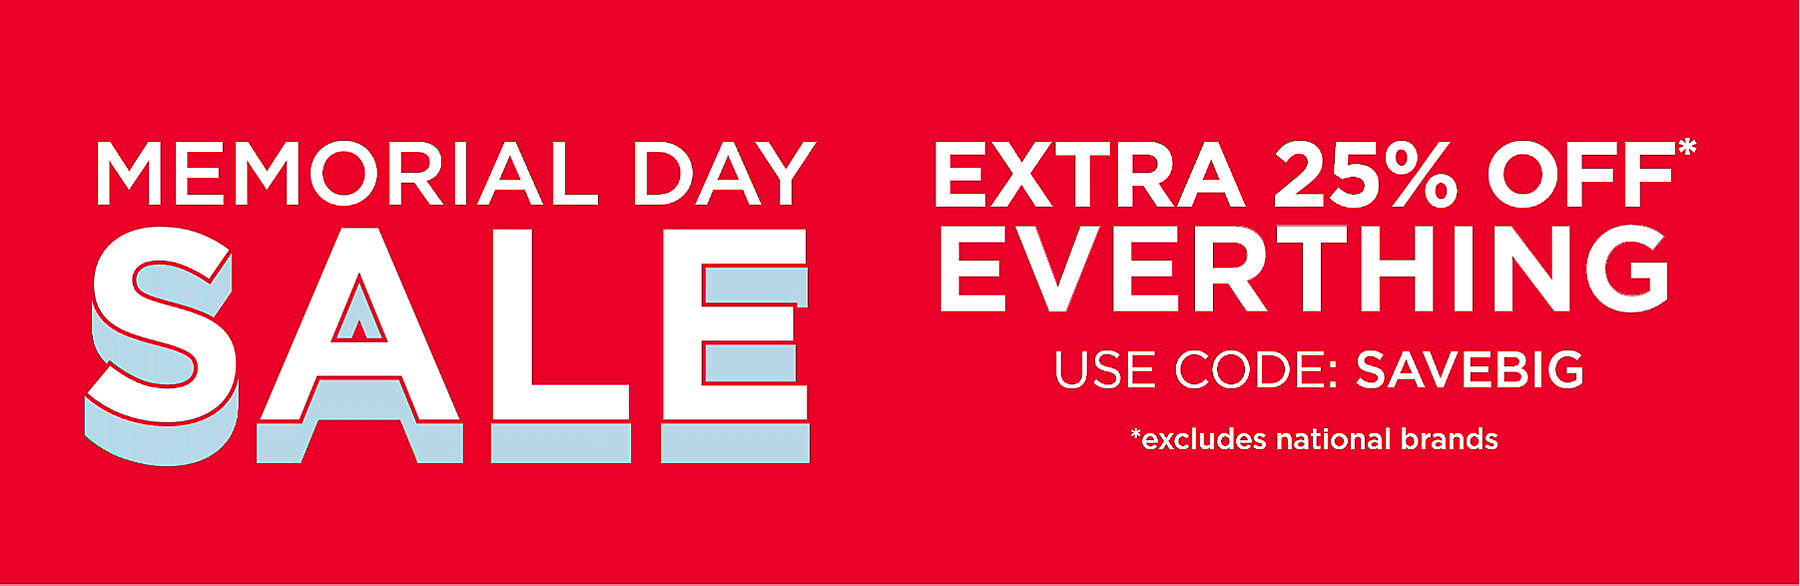 Memorial Day Sale Extra 25% off* everything use code: SAVEBIG *excludes national brands